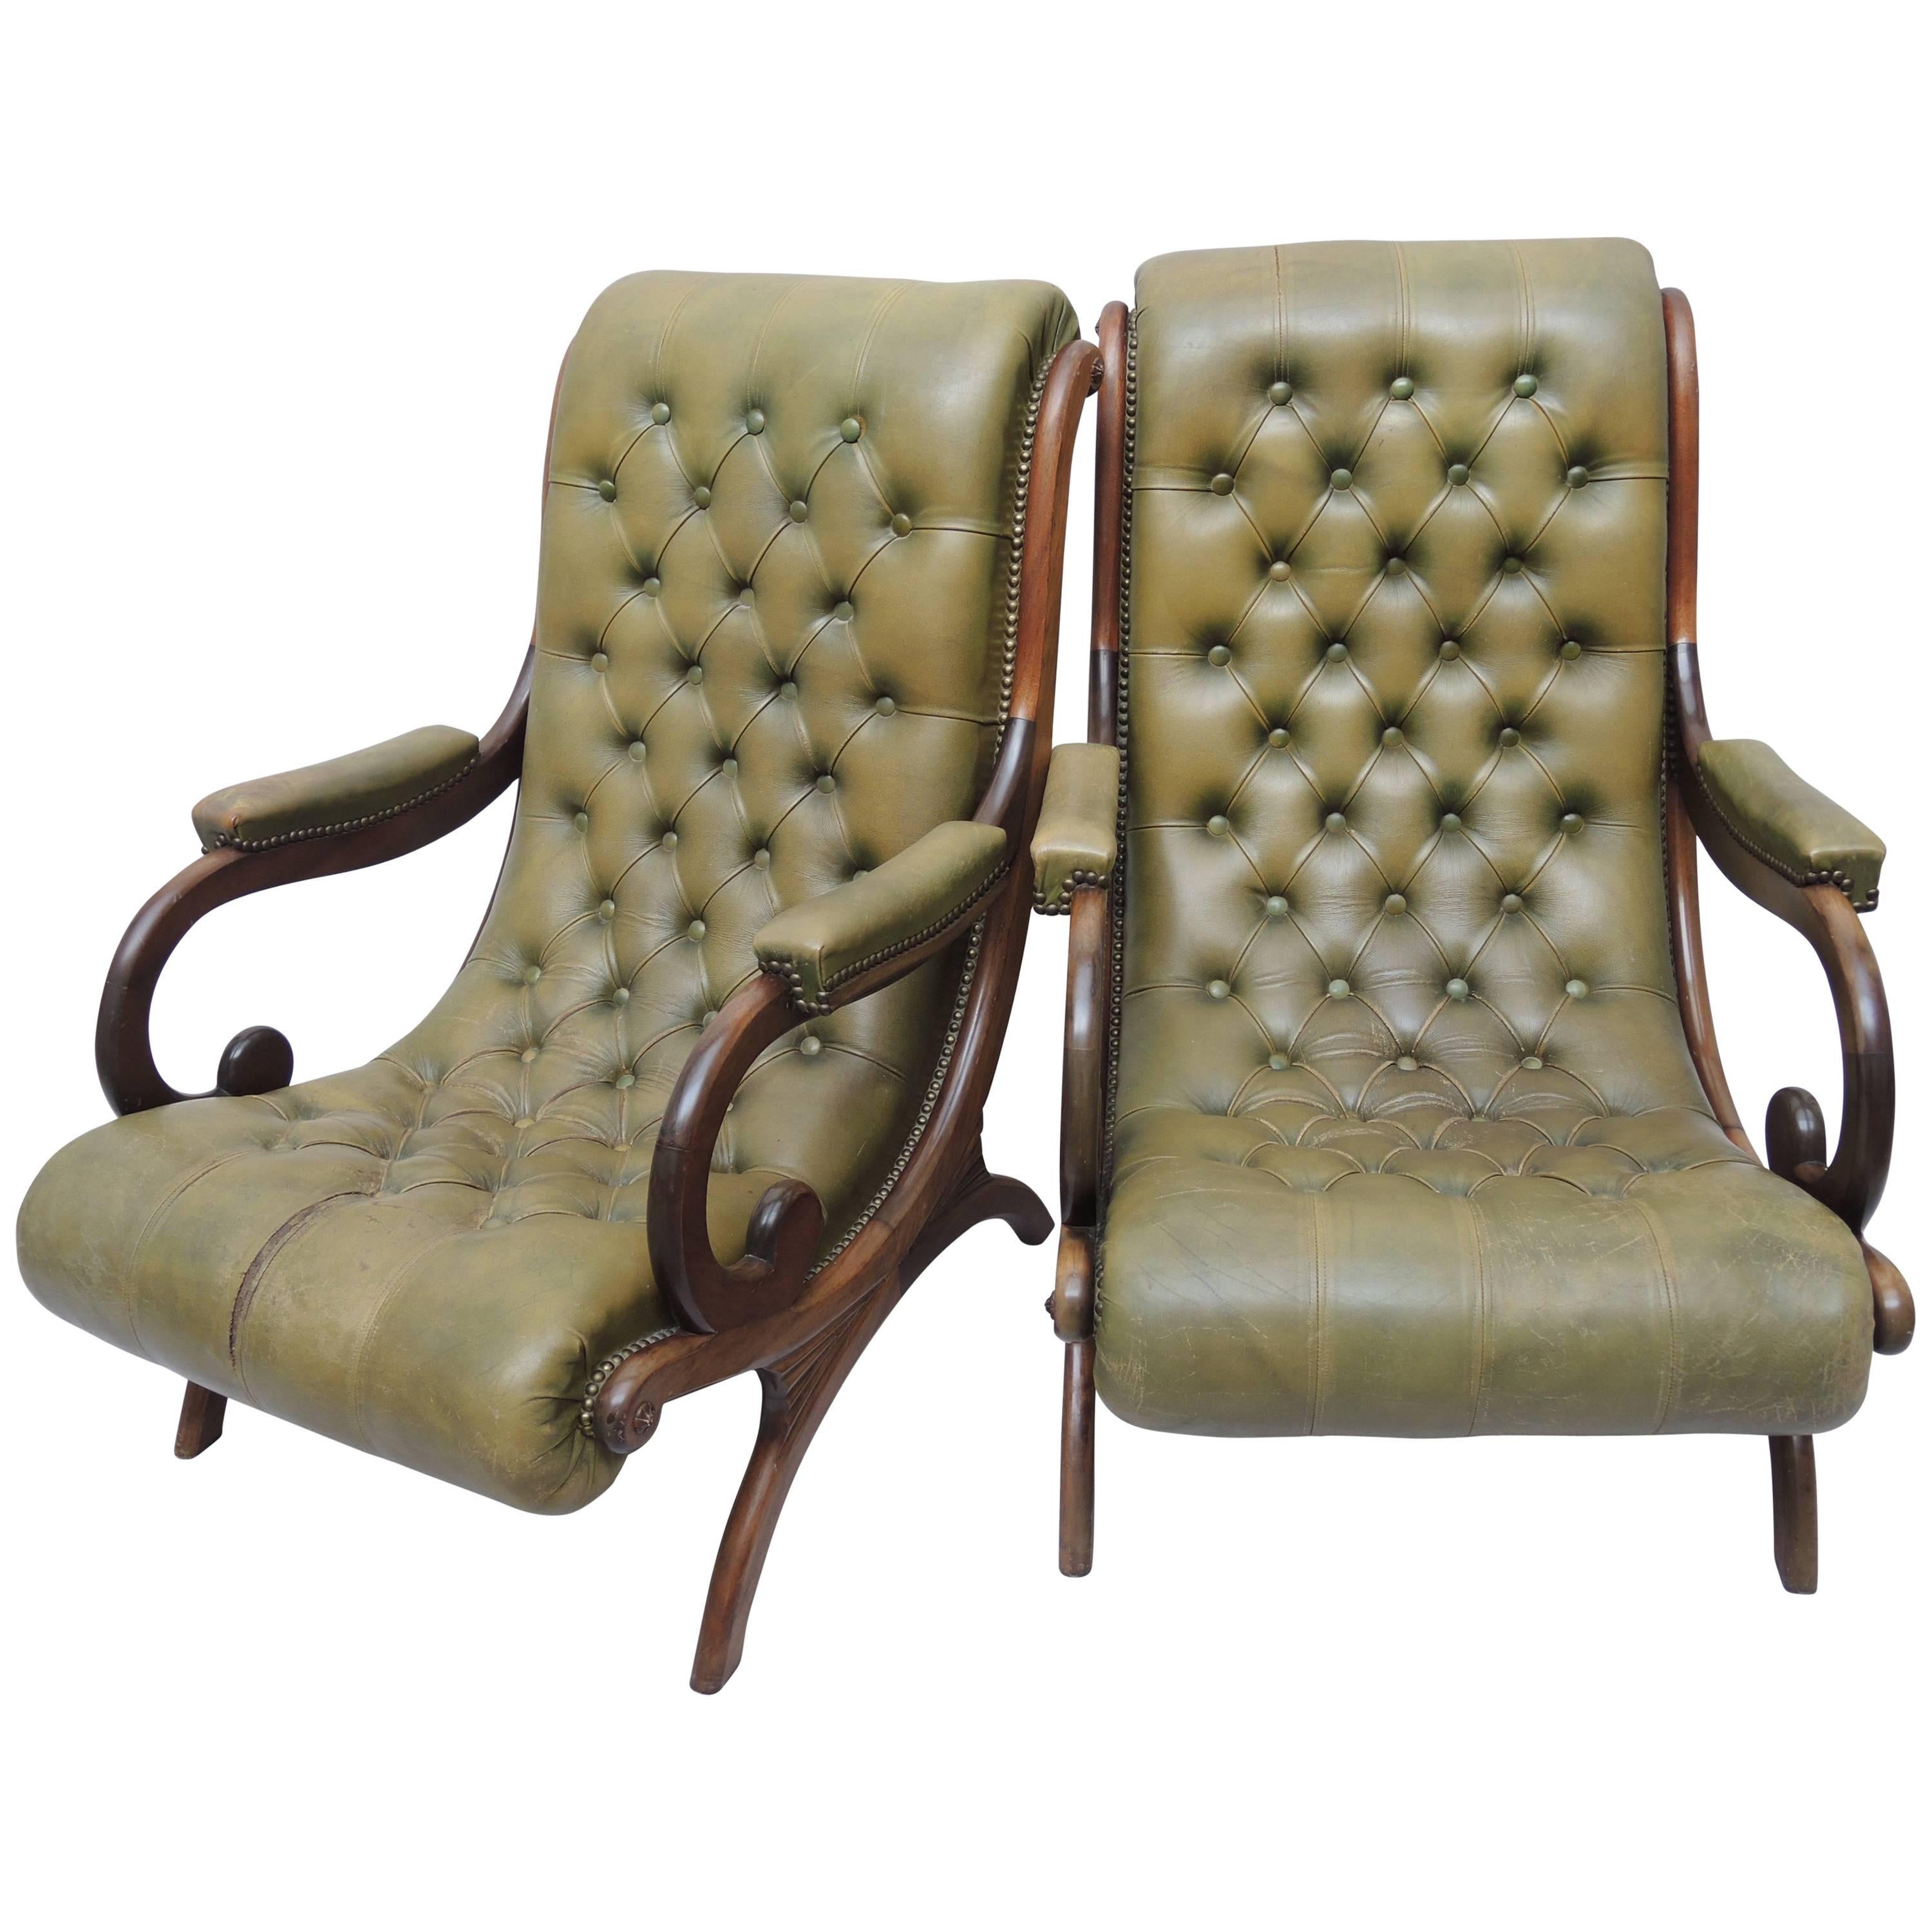 Pair of Mahogany Tufted Leather British Colonial Arm Chairs